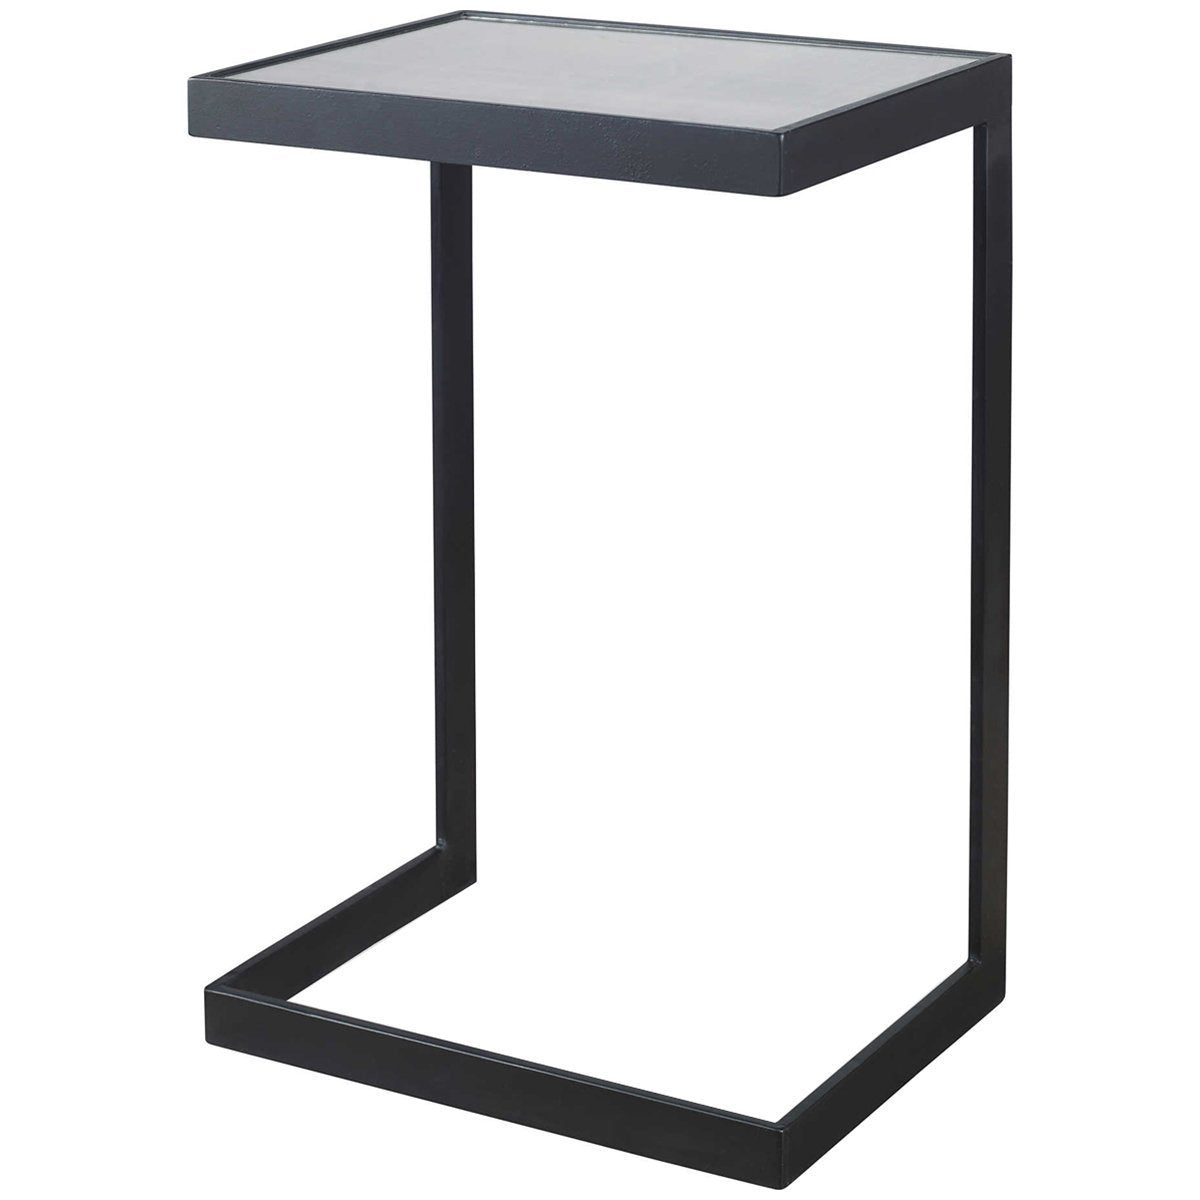 Uttermost Windell Cantilever Accent Table